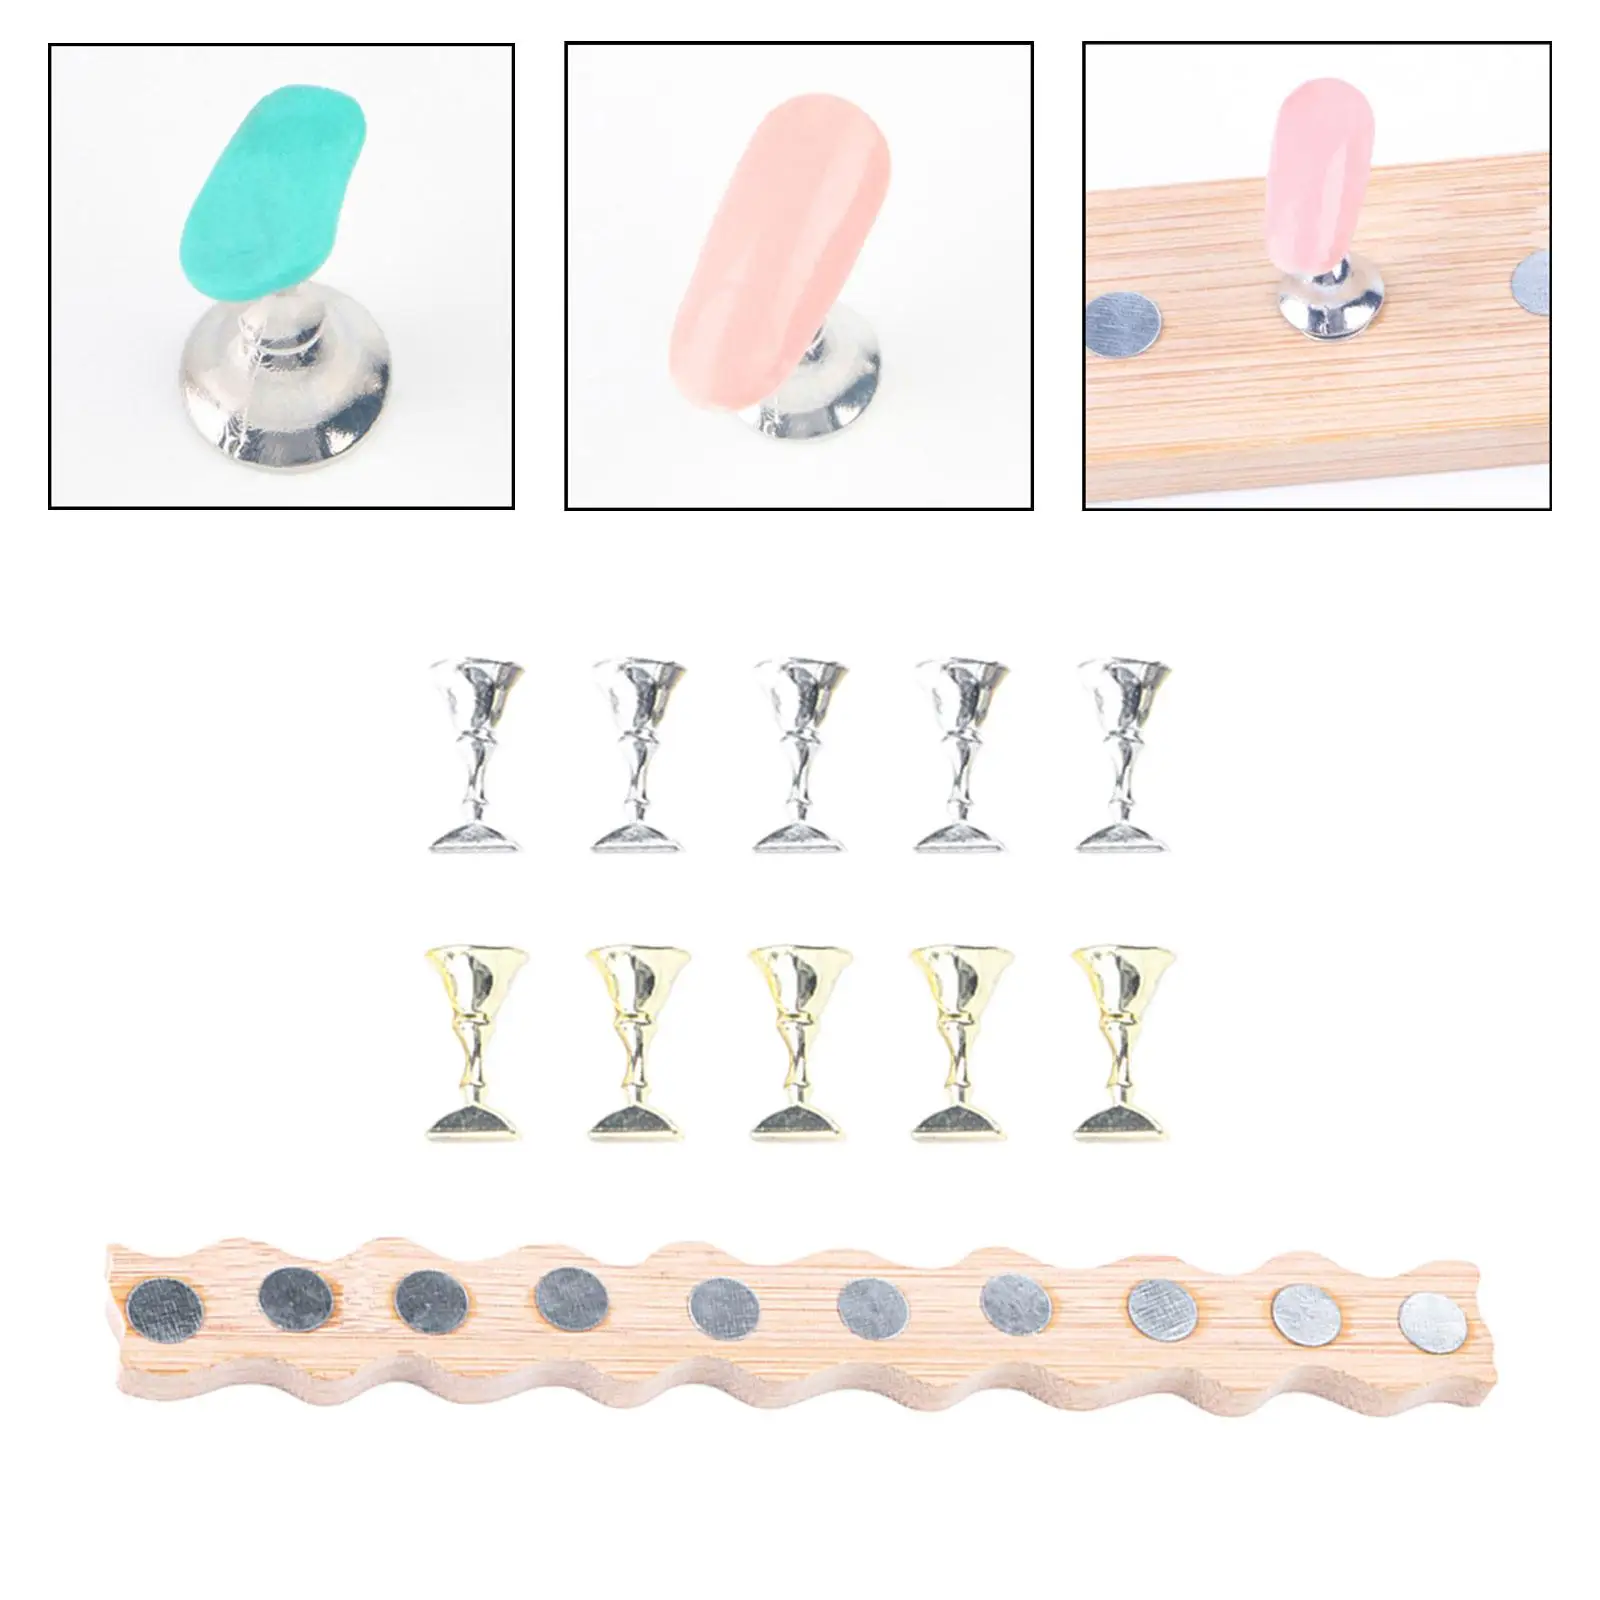 Nail Stand Nail Art Supplies Reusable Nail Showing Shelf Nail Tip Art Display Holder for Training Practice Manicurists Beginner